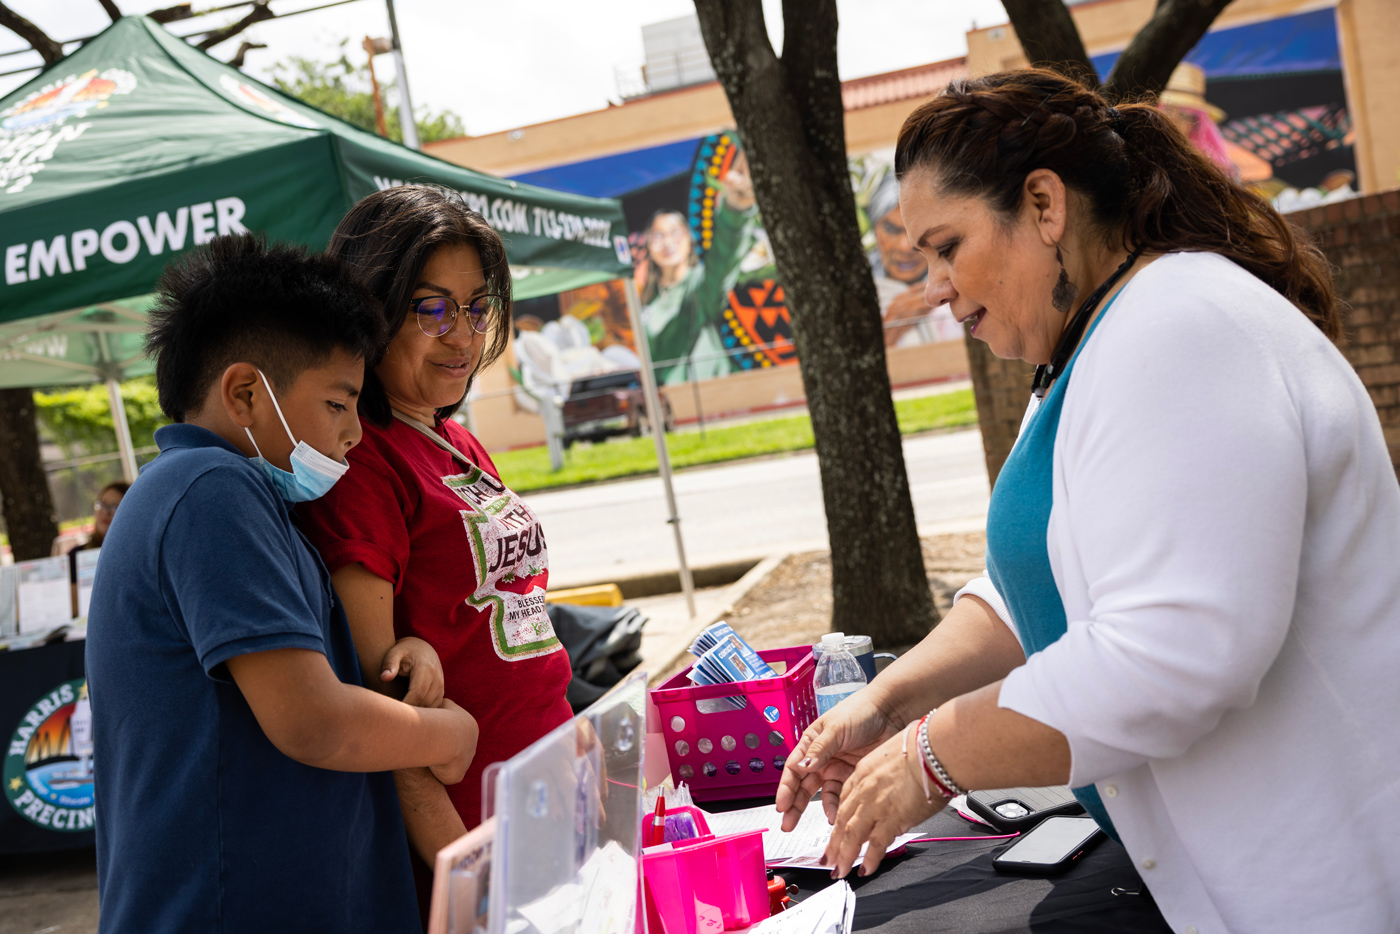 Kevin Garcia, 10, at left, holds onto his mother Deily Escobar as she talks with Margarita Romo, of Civic Heart Community Services, at right, about renewing her son’s Medicaid coverage during a community health event Thursday, May 11, 2023, in Houston.